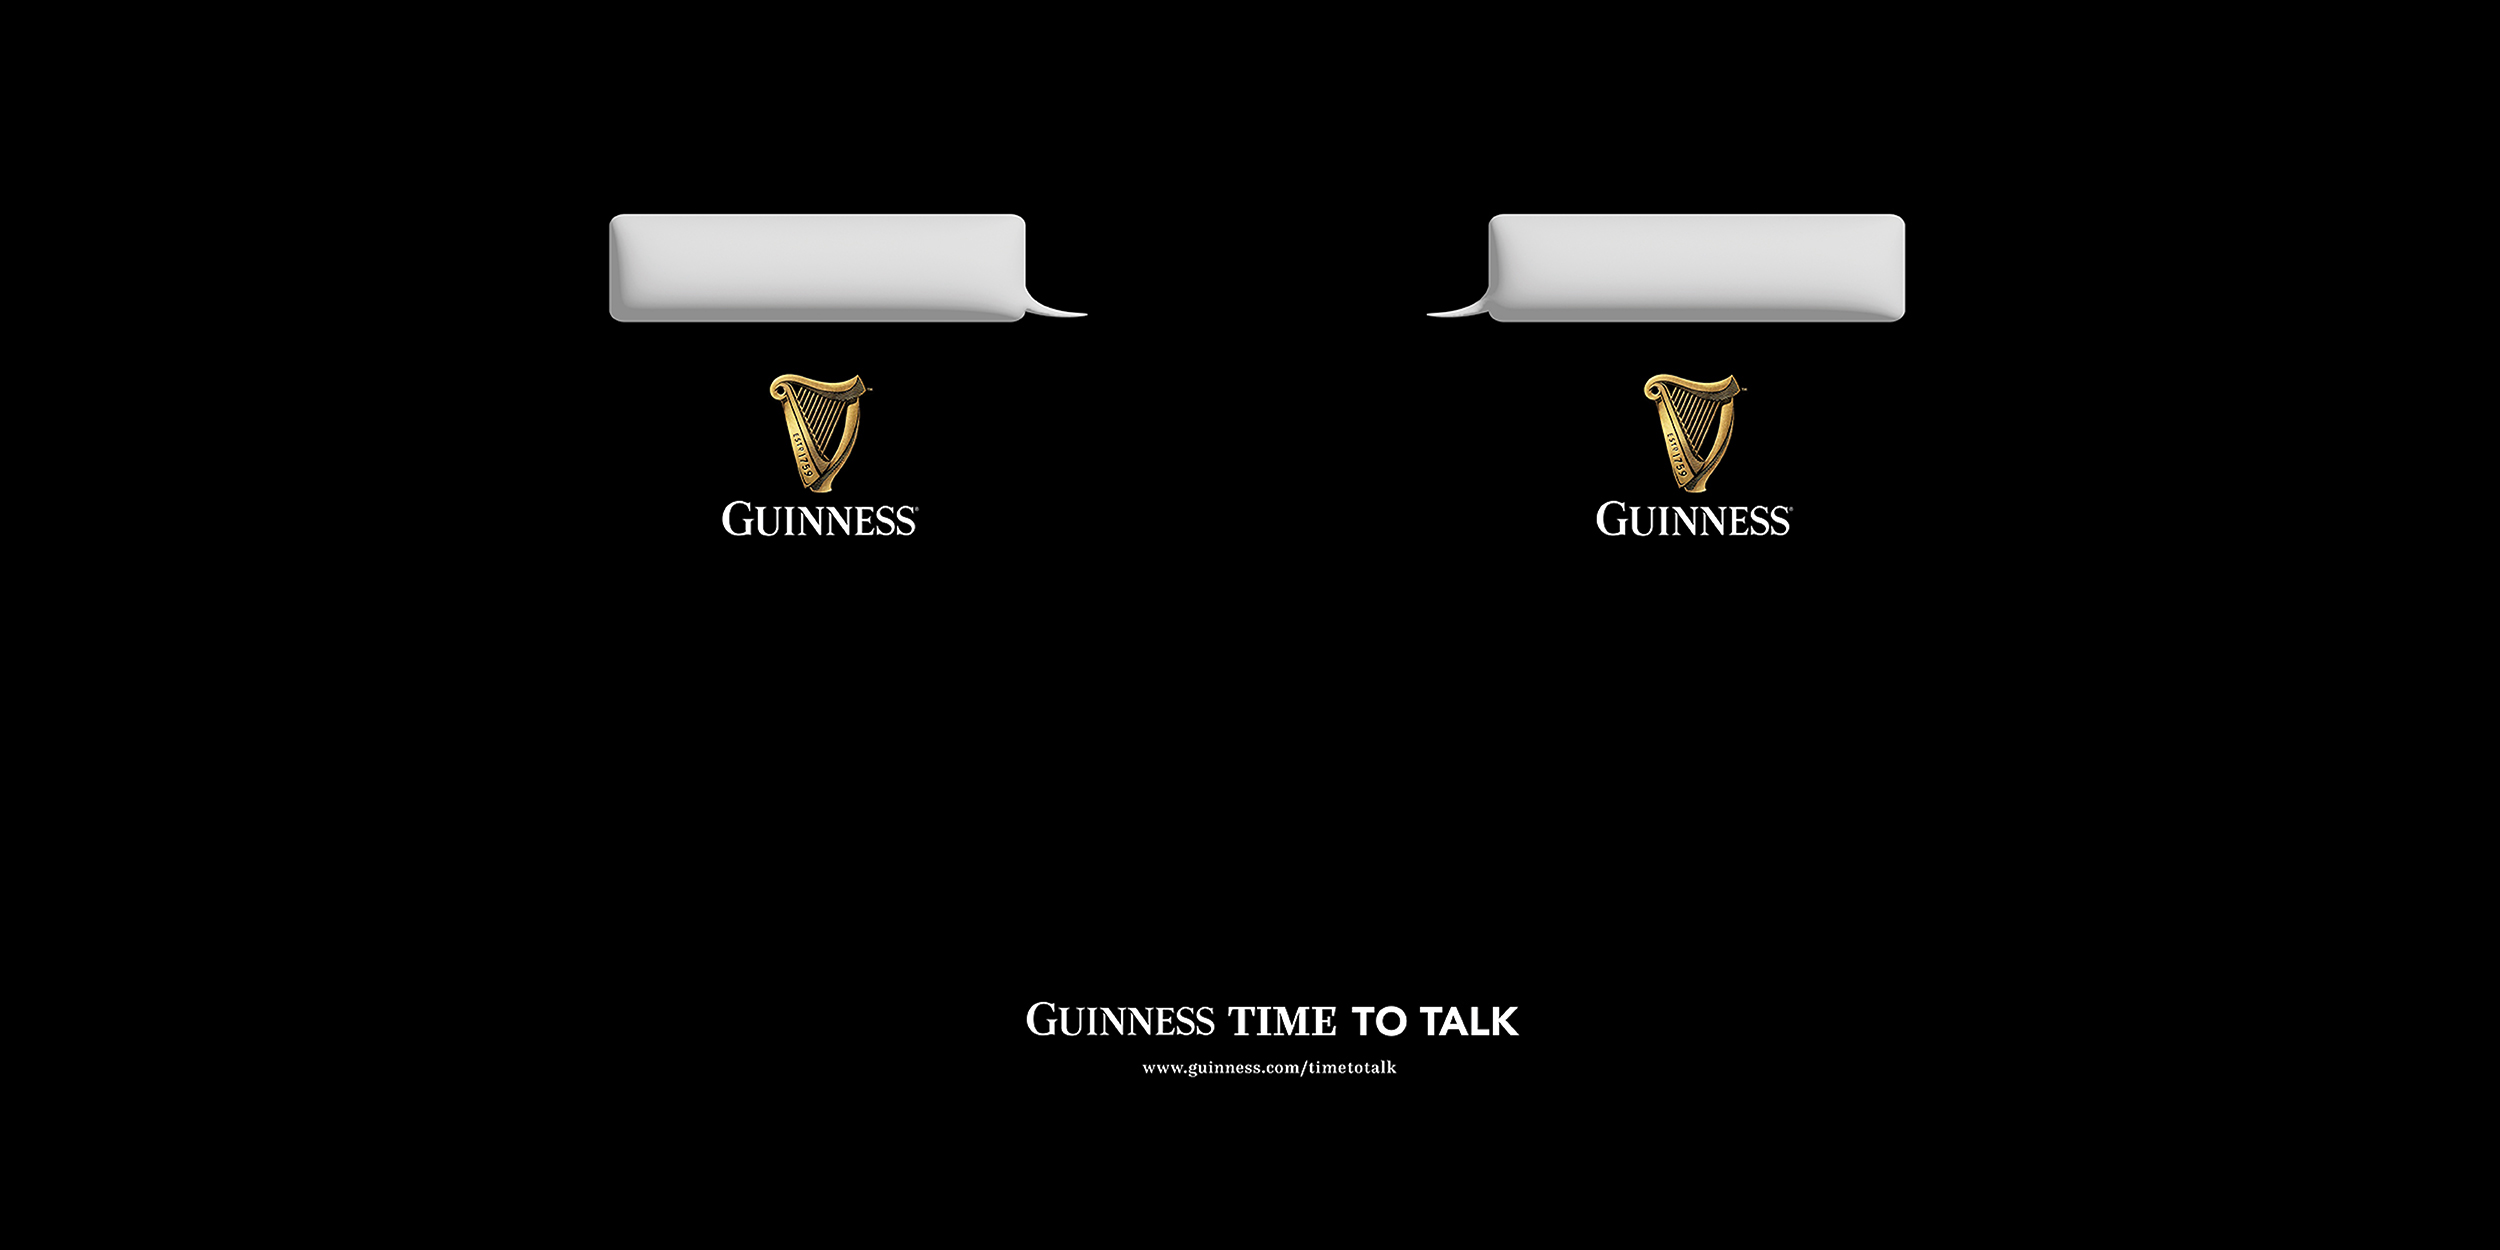 A black background with two speech bubbles positioned to look like the head on a pint of Guinness